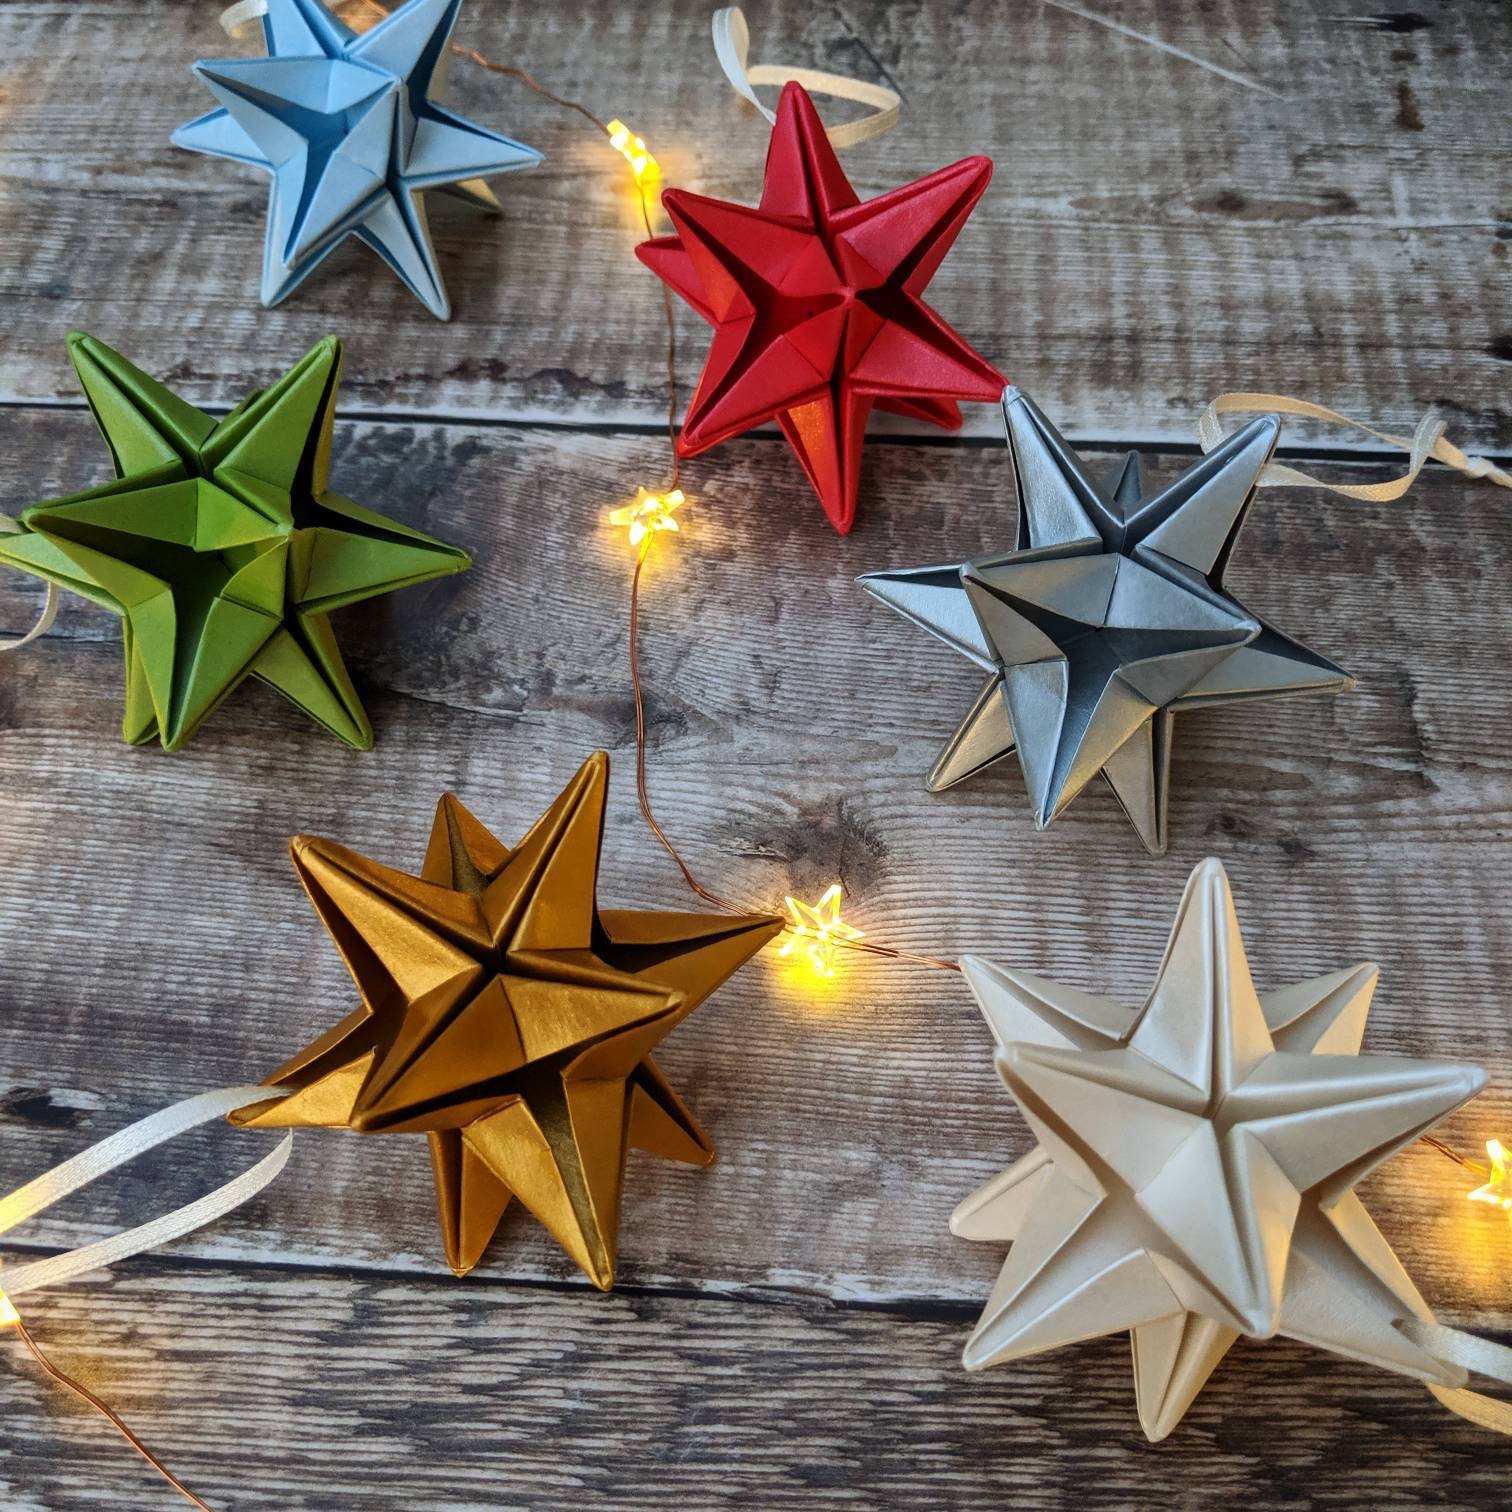 Origami star ornaments set of 3 Christmas tree decorations | Etsy